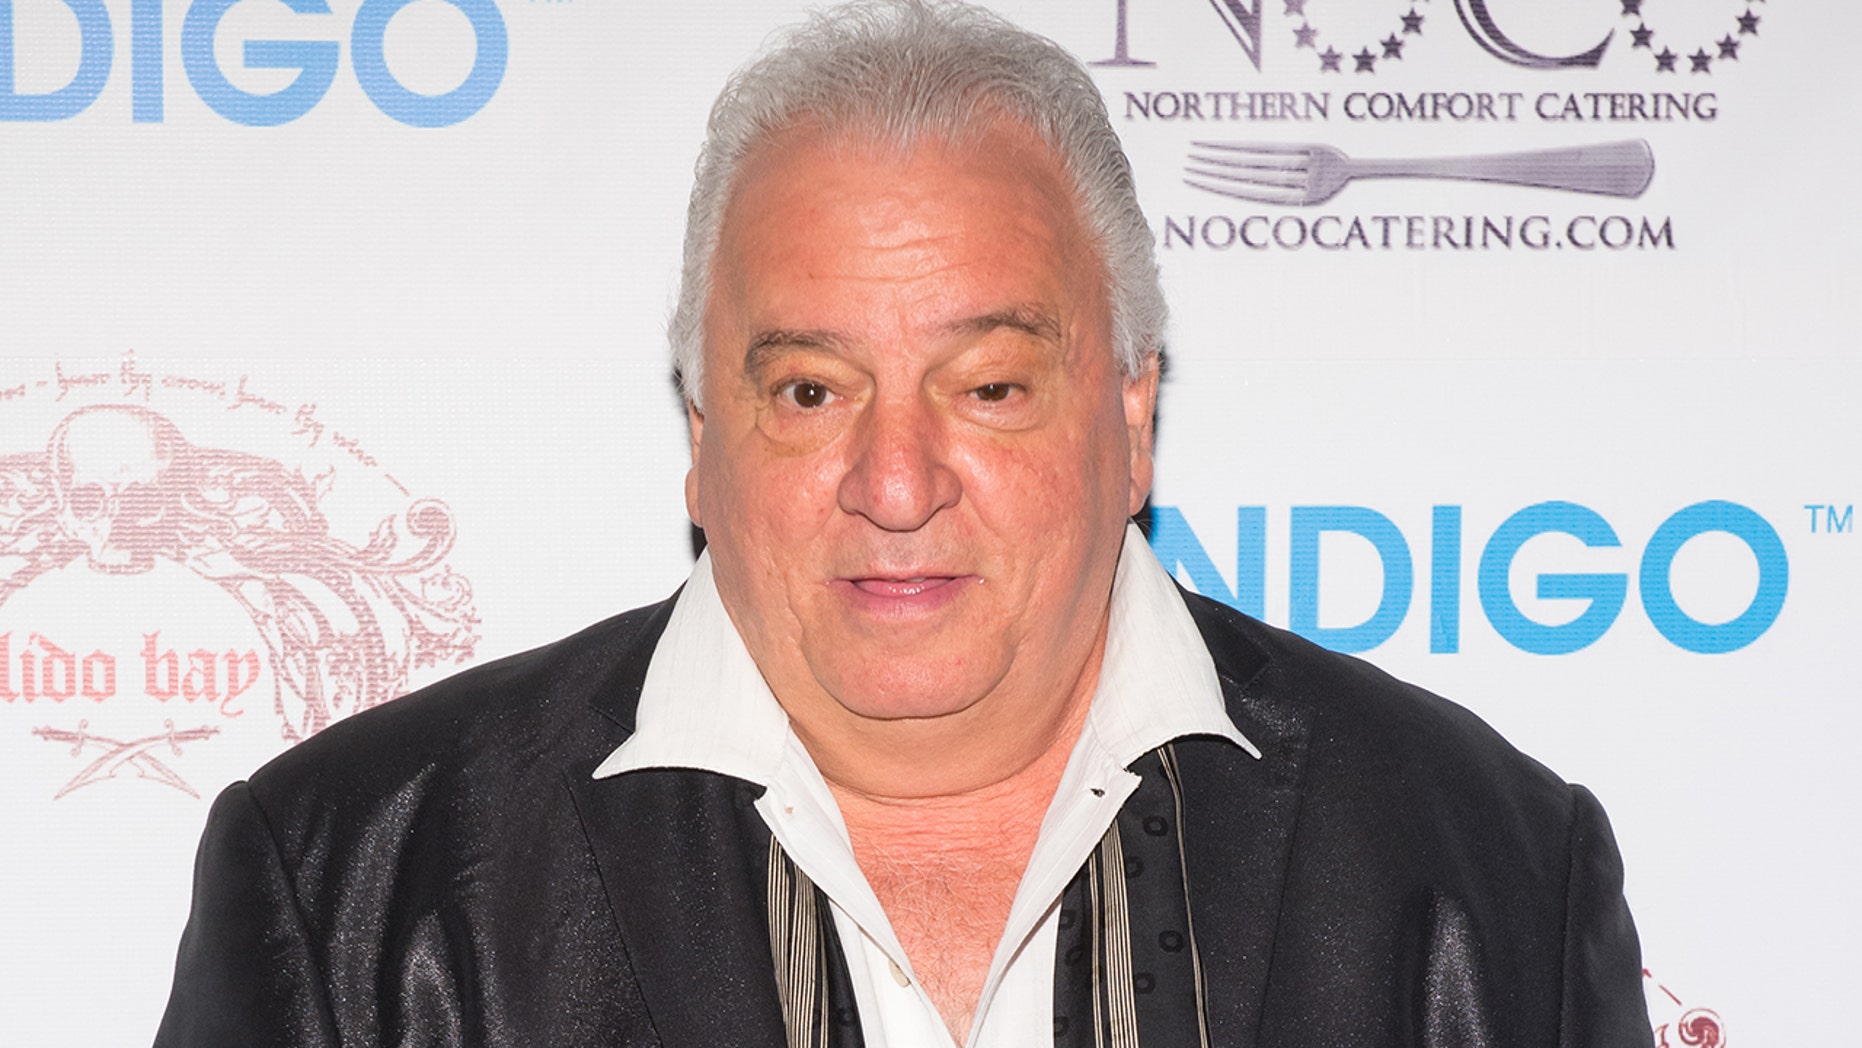 The actor Vinny Vella has died of liver cancer, according to reports from his family and his representatives.